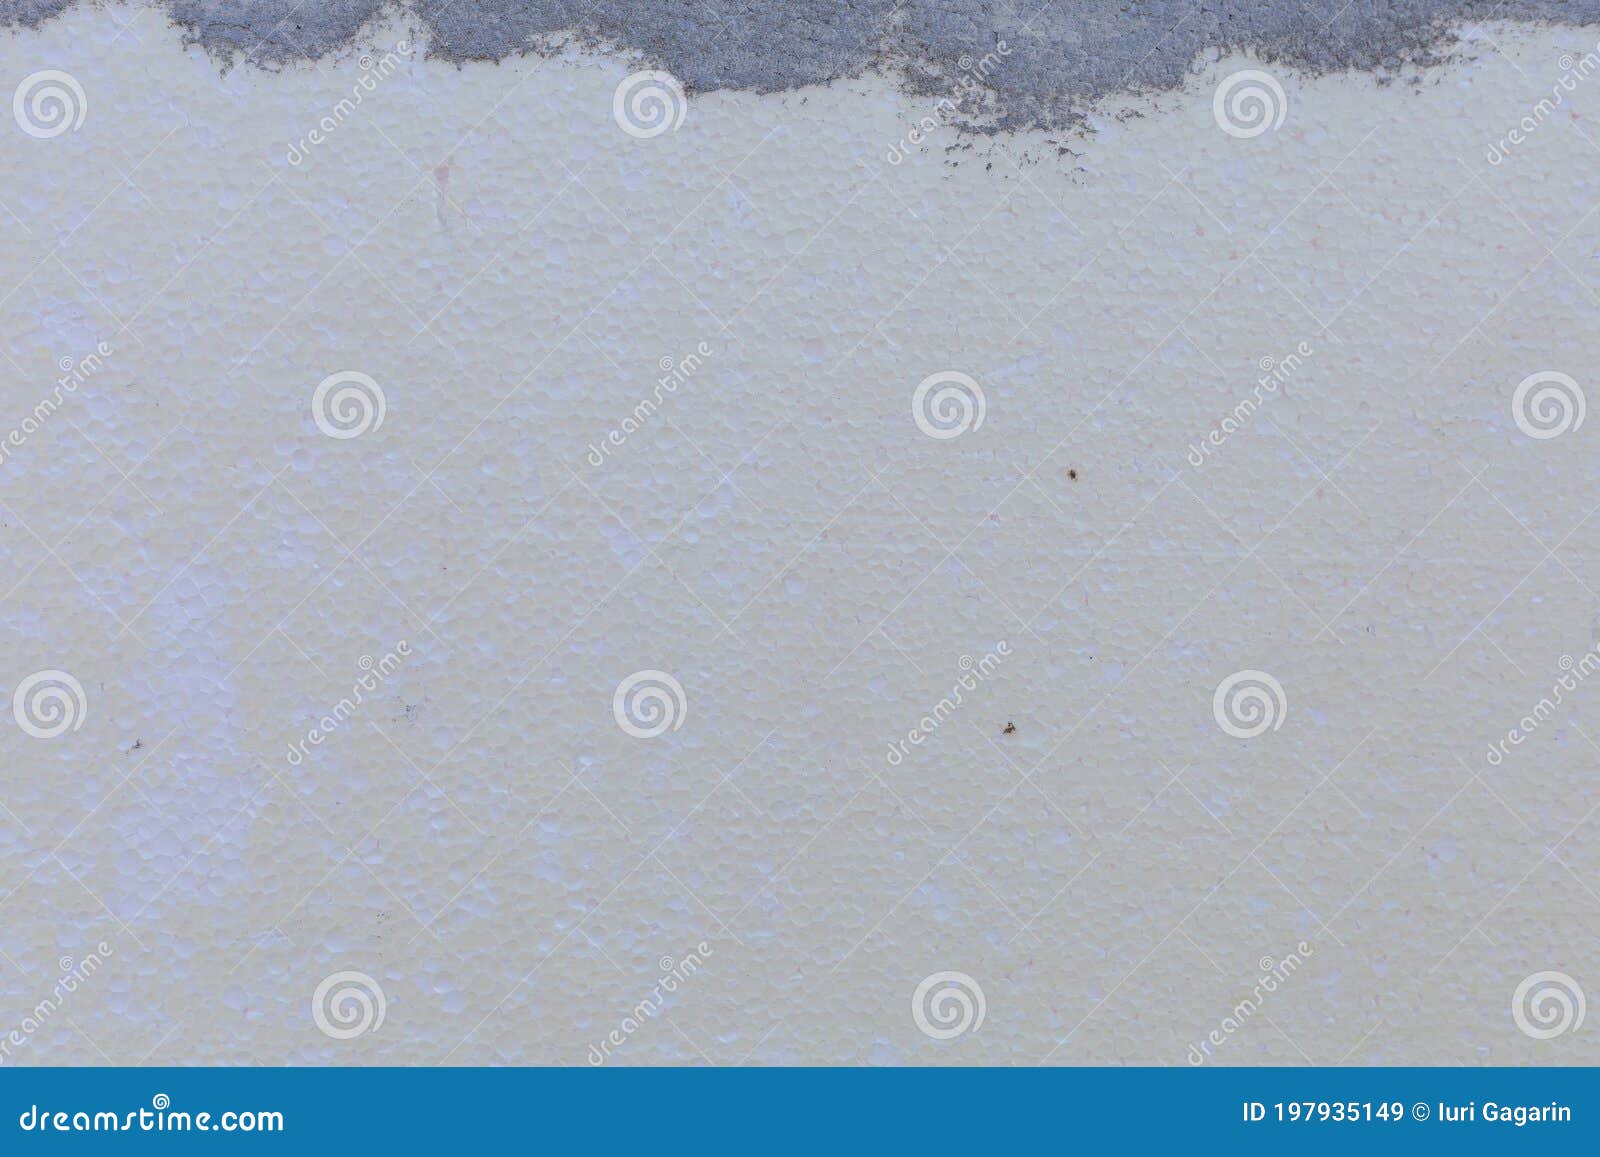 styrofoam wall texture background for house insulation or energy saving in winter